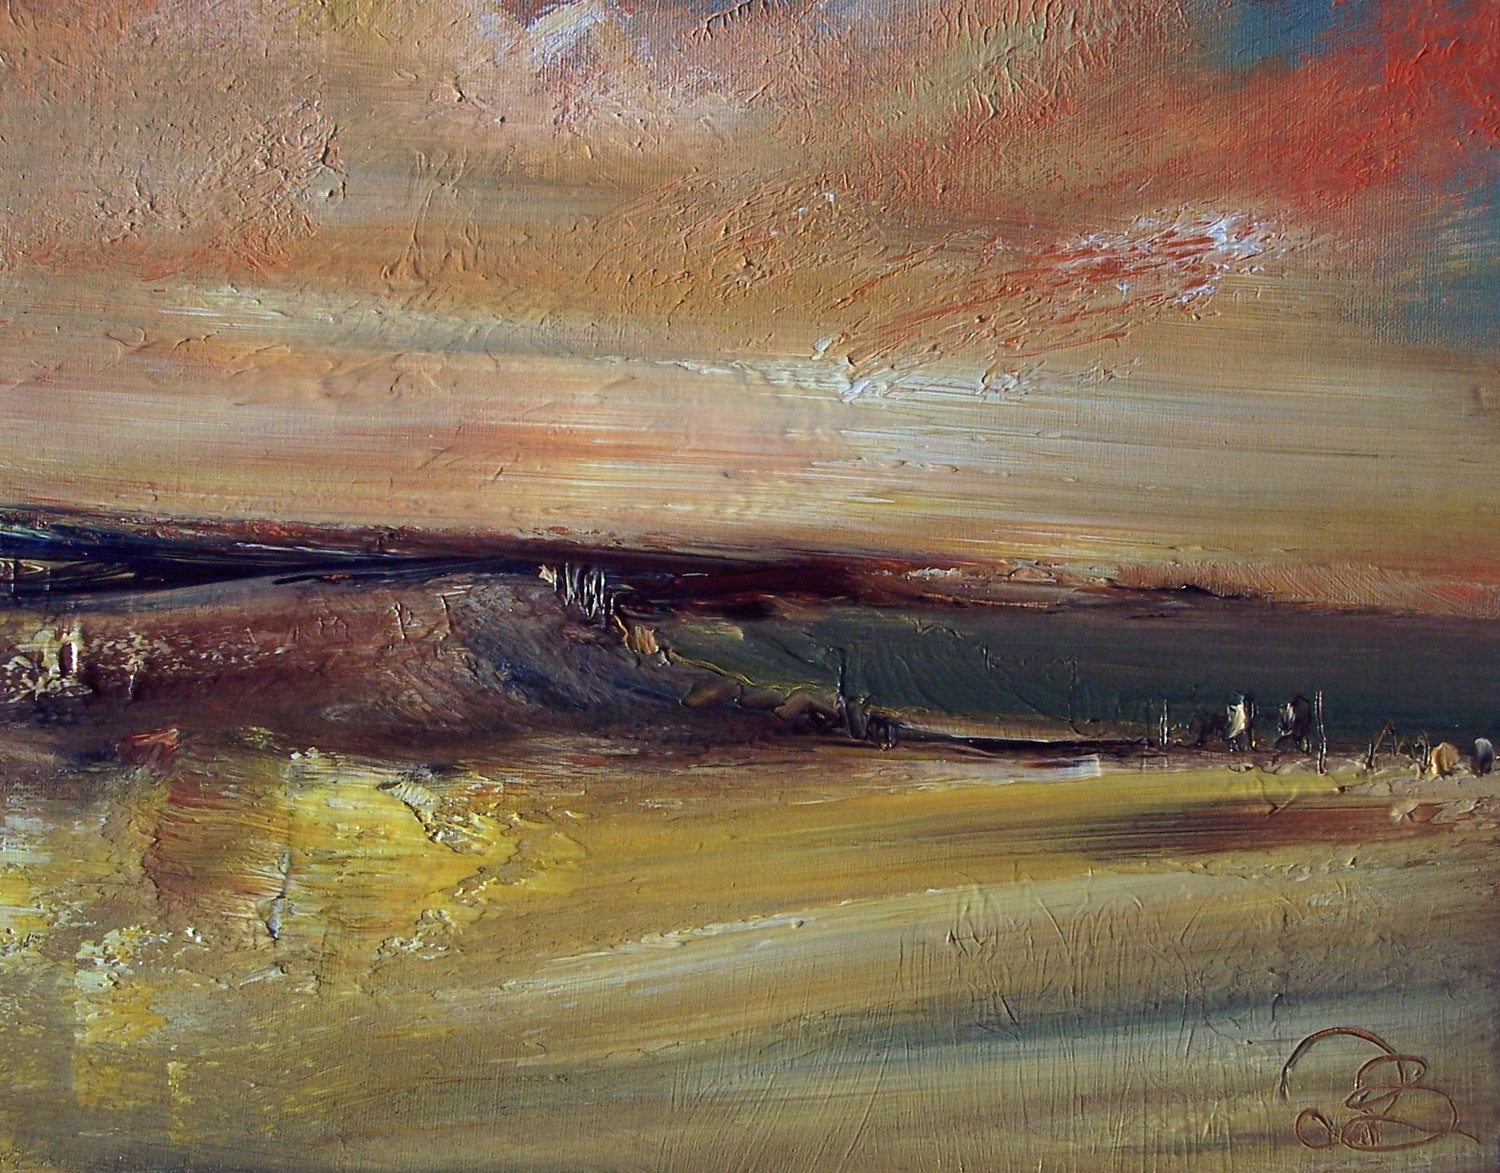 'Fading View' by artist Rosanne Barr